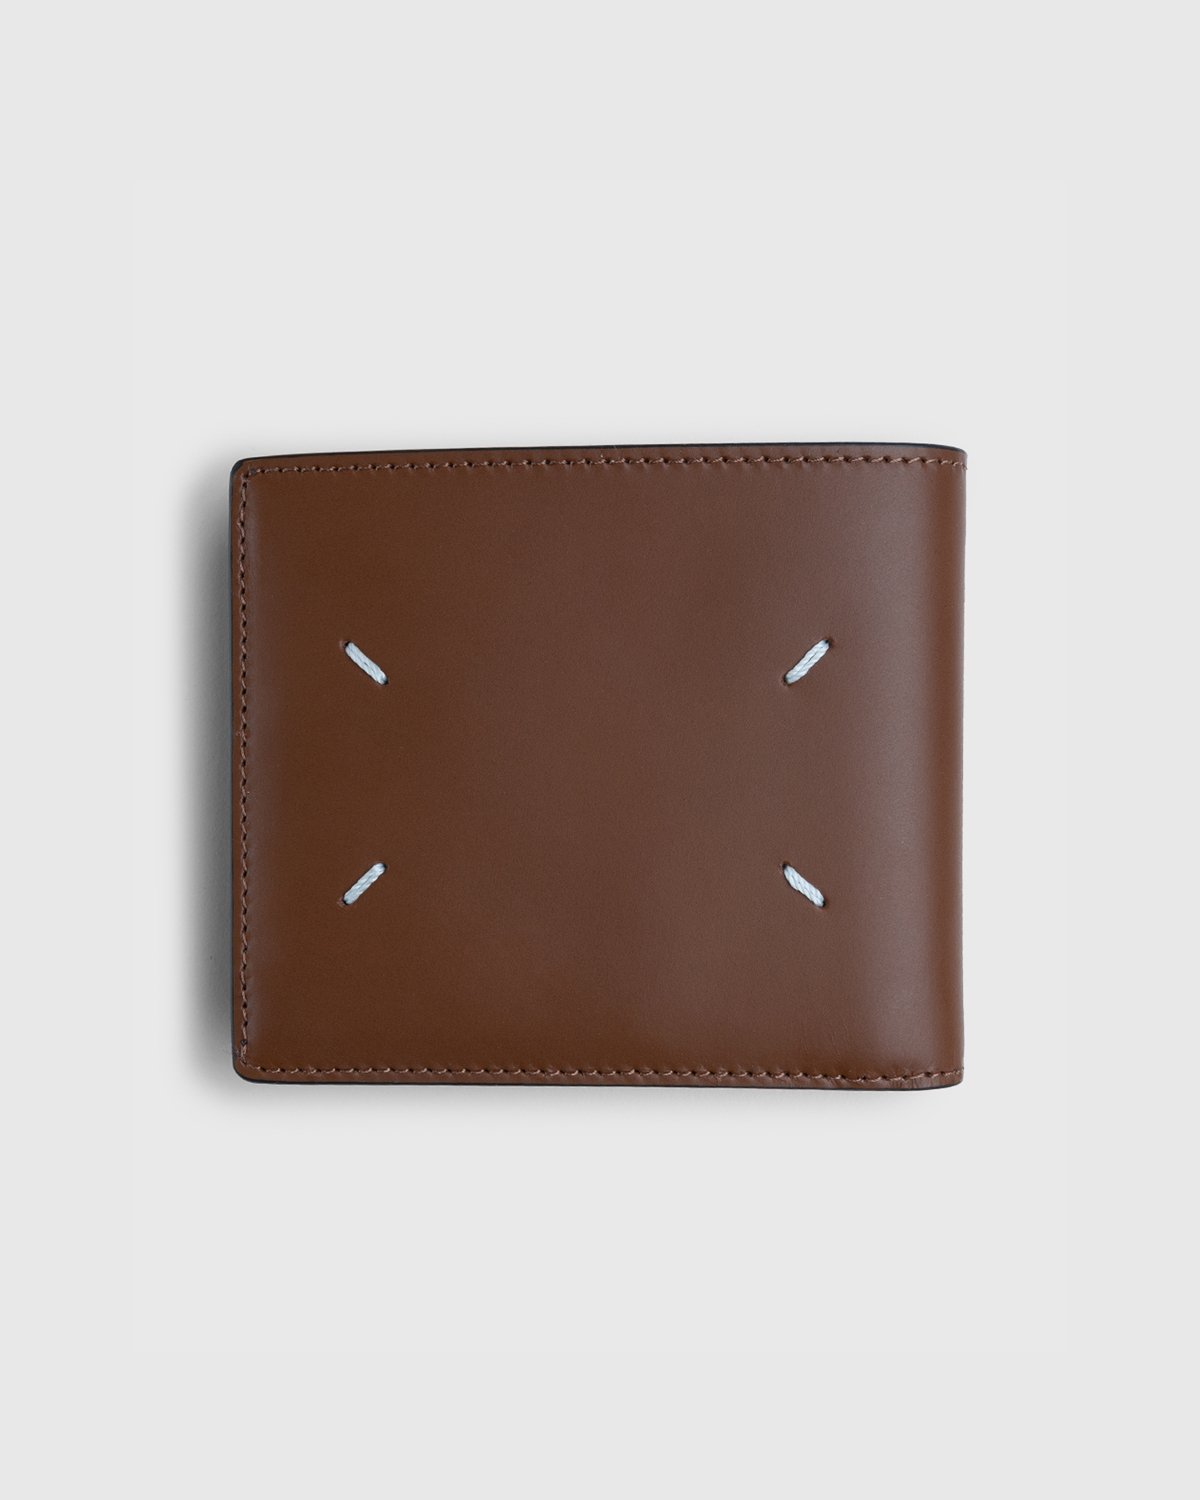 Maison Margiela - Leather Wallet Brown - Accessories - Brown - Image 1